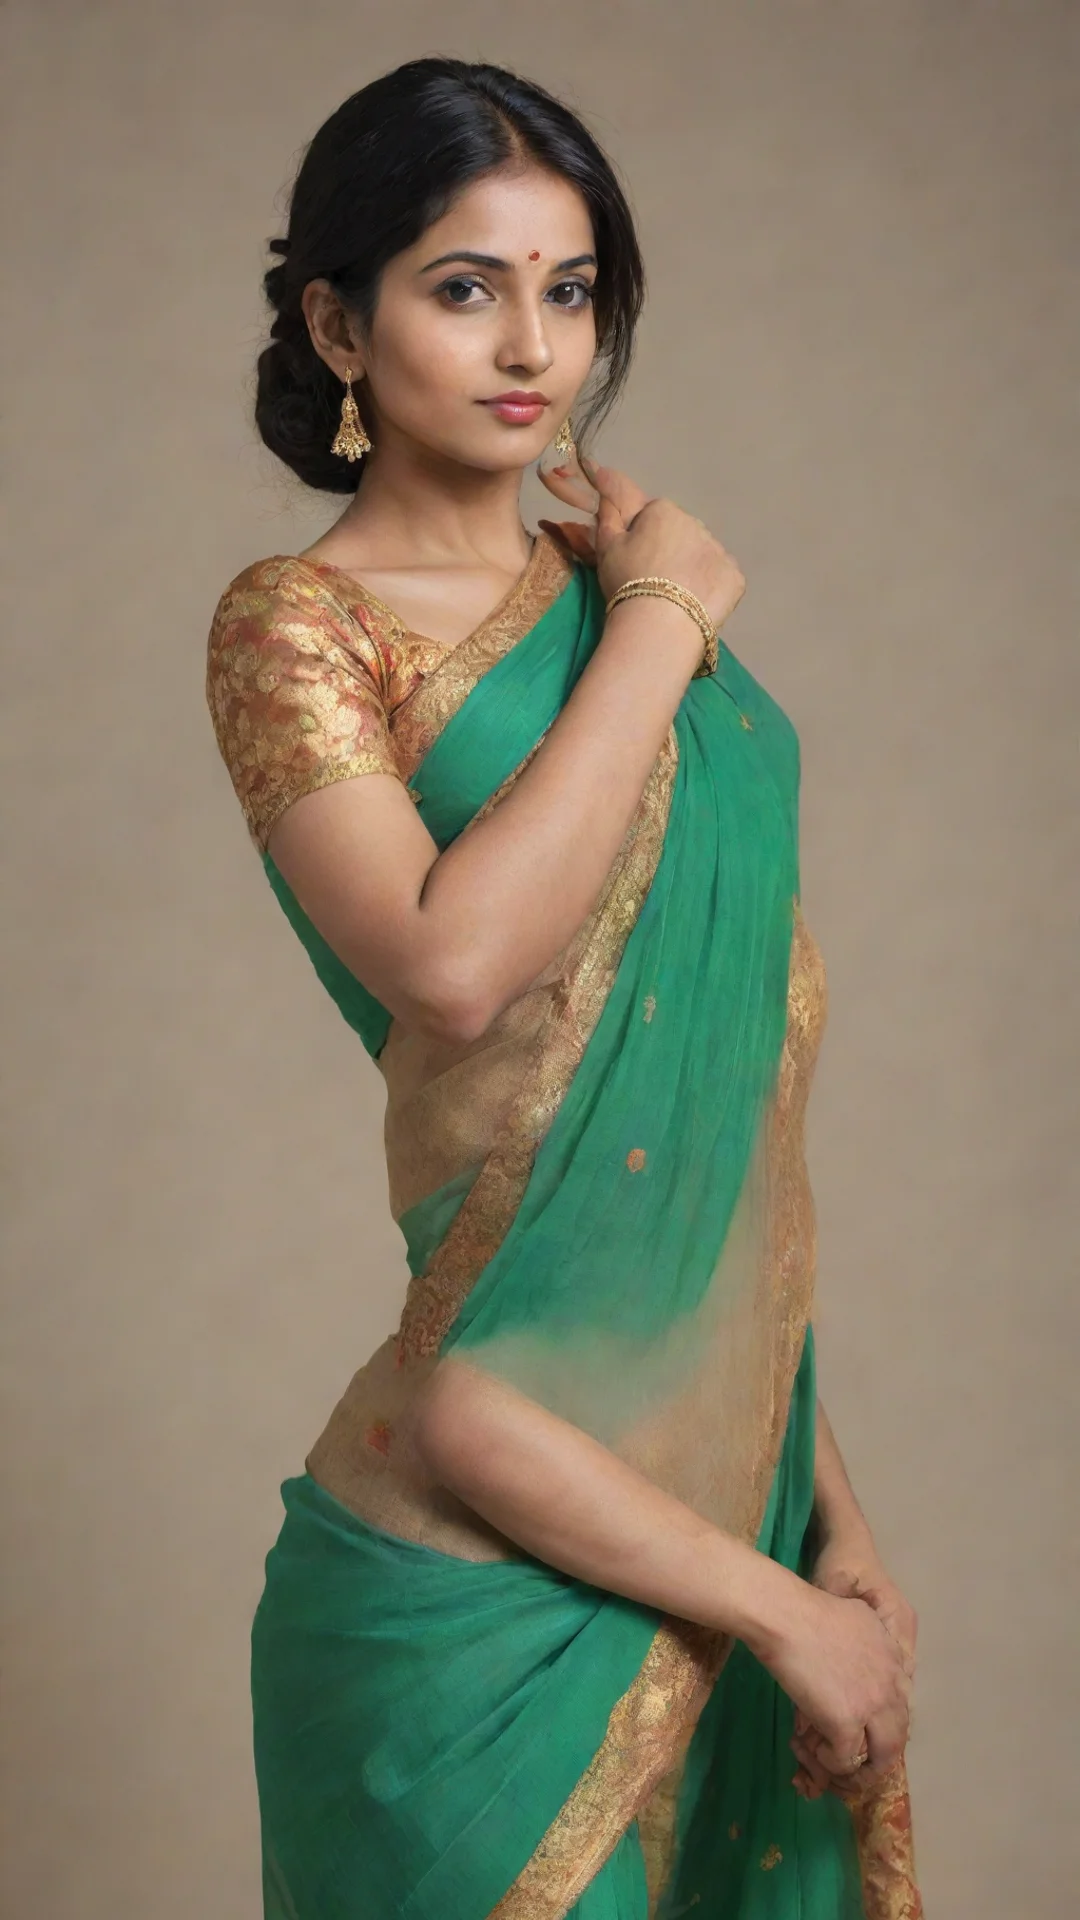 aitrending indian woman in saree good looking fantastic 1 tall